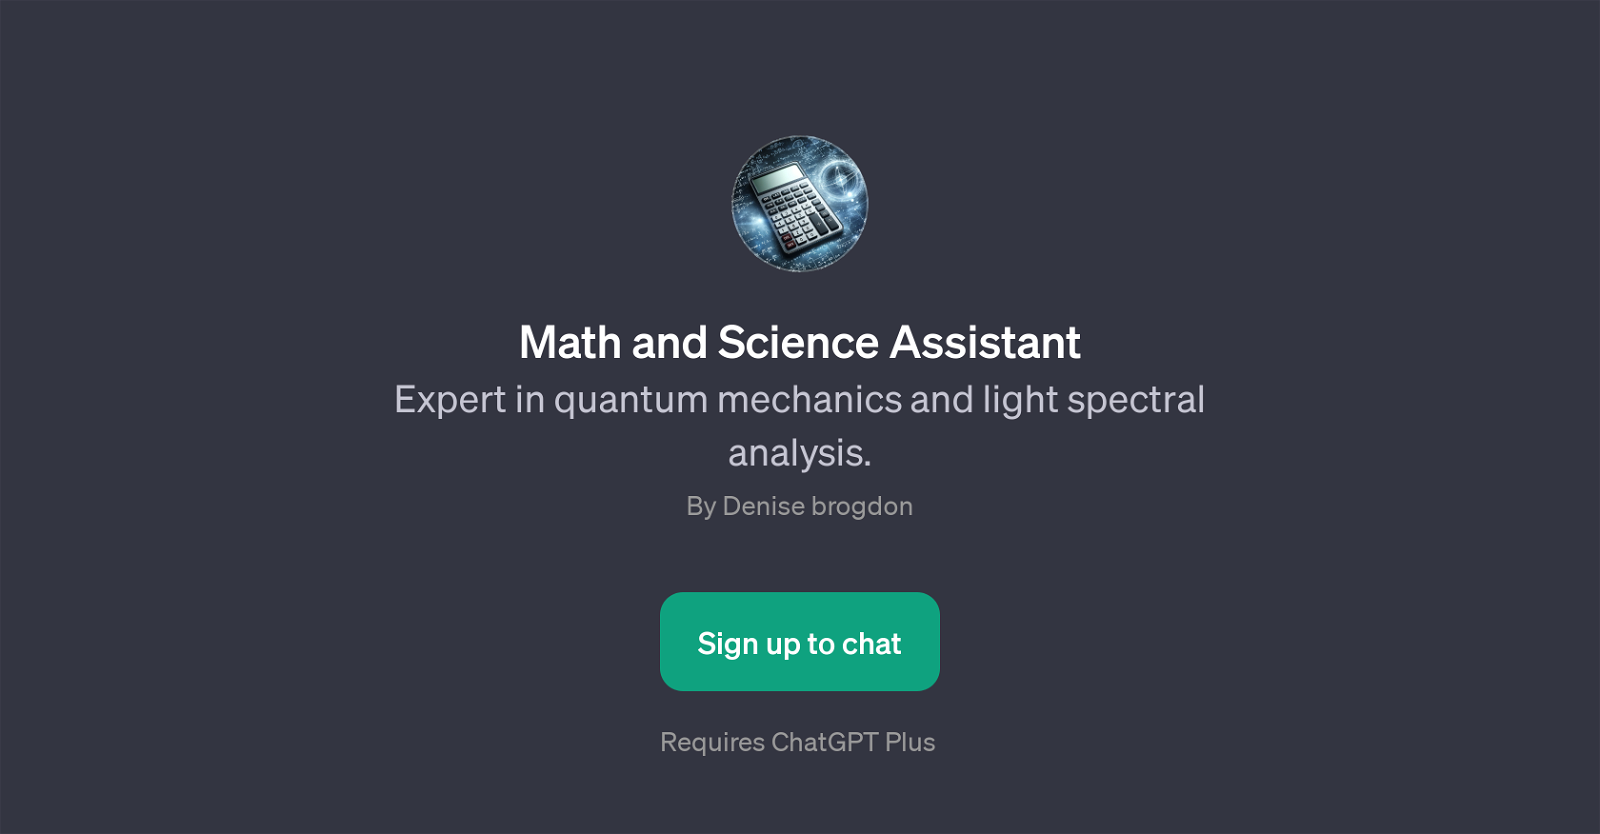 Math and Science Assistant website